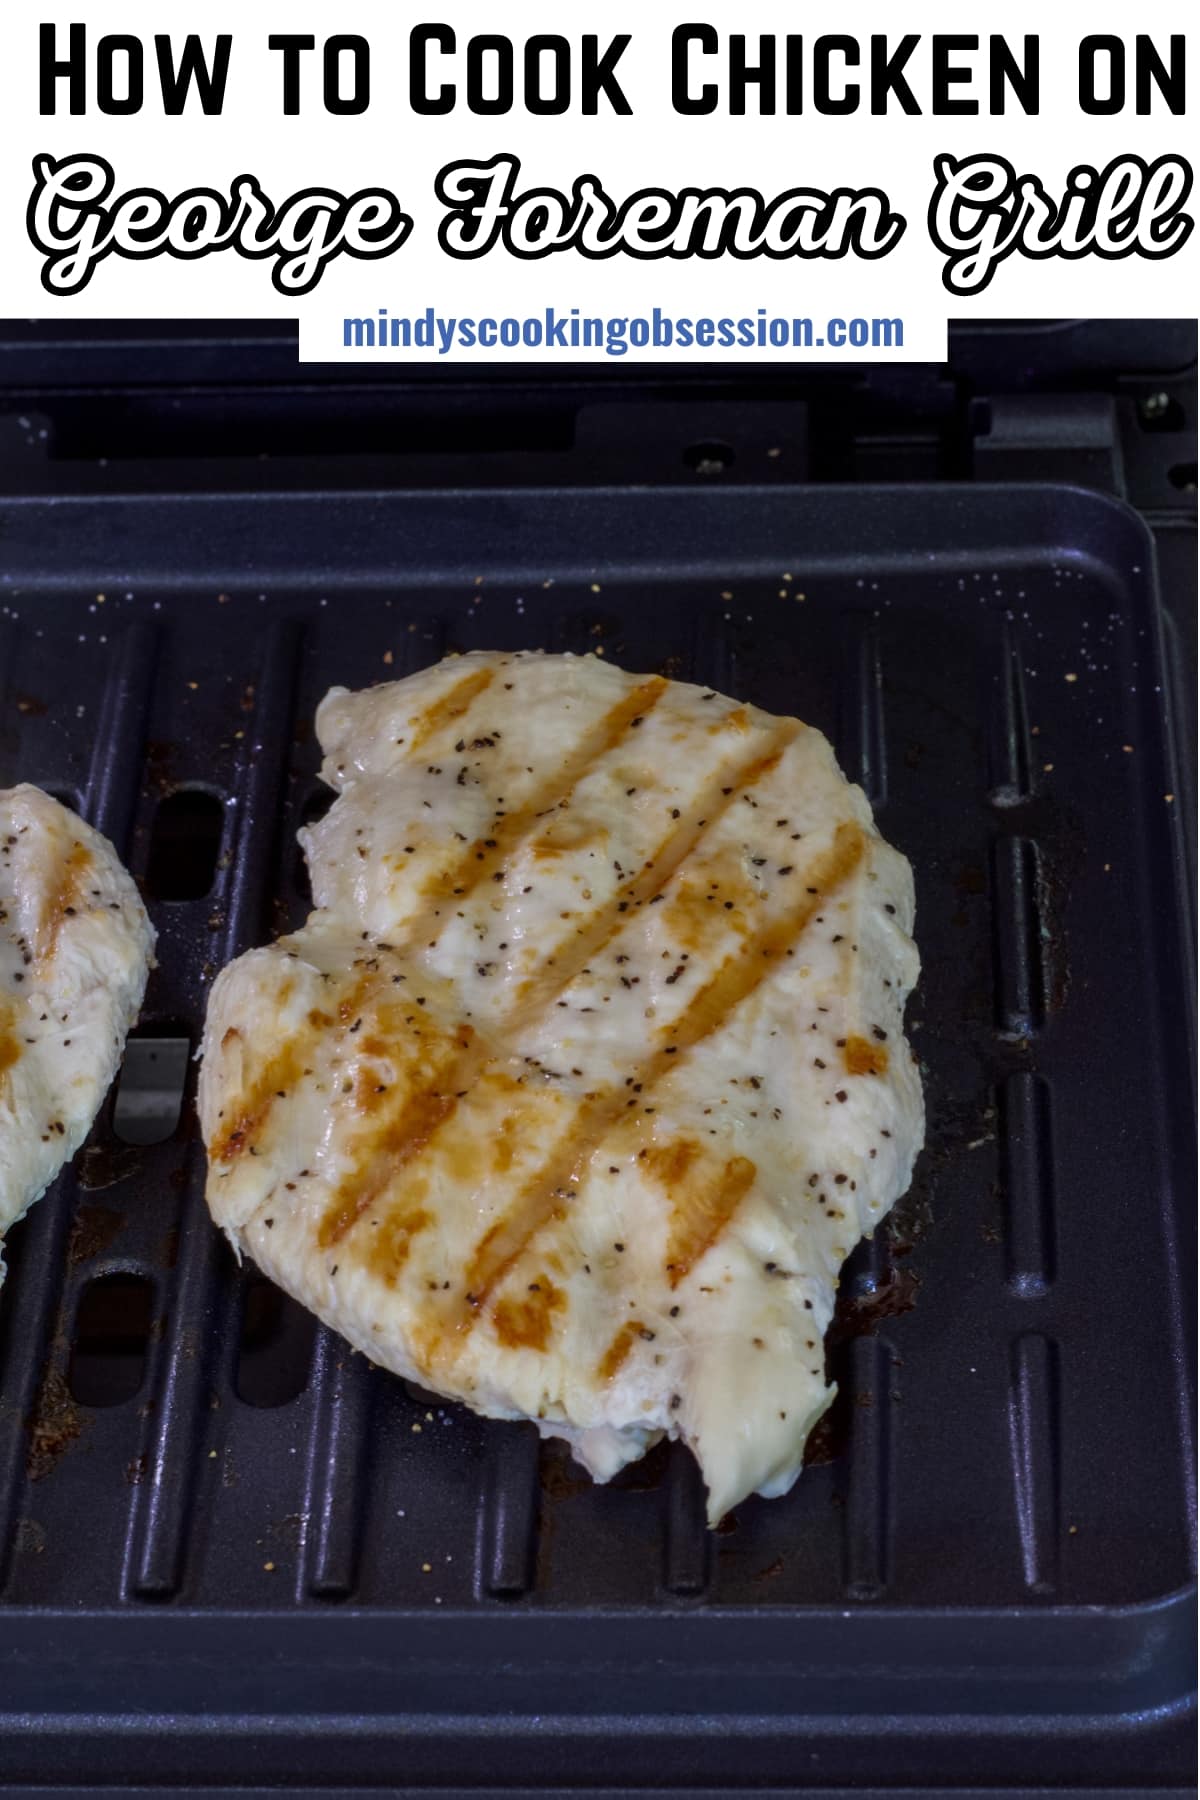 Looking for a quick and healthy meal perfect for any night of the week? You have come to the right place. Learn how to cook delicious and juicy chicken breasts on your George Foreman Grill in just minutes. All you need are 4 simple ingredients; chicken breasts, cooking spray, salt, and pepper. This recipe is perfect for beginners or busy cooks who want a fuss-free main dish. via @mindyscookingobsession